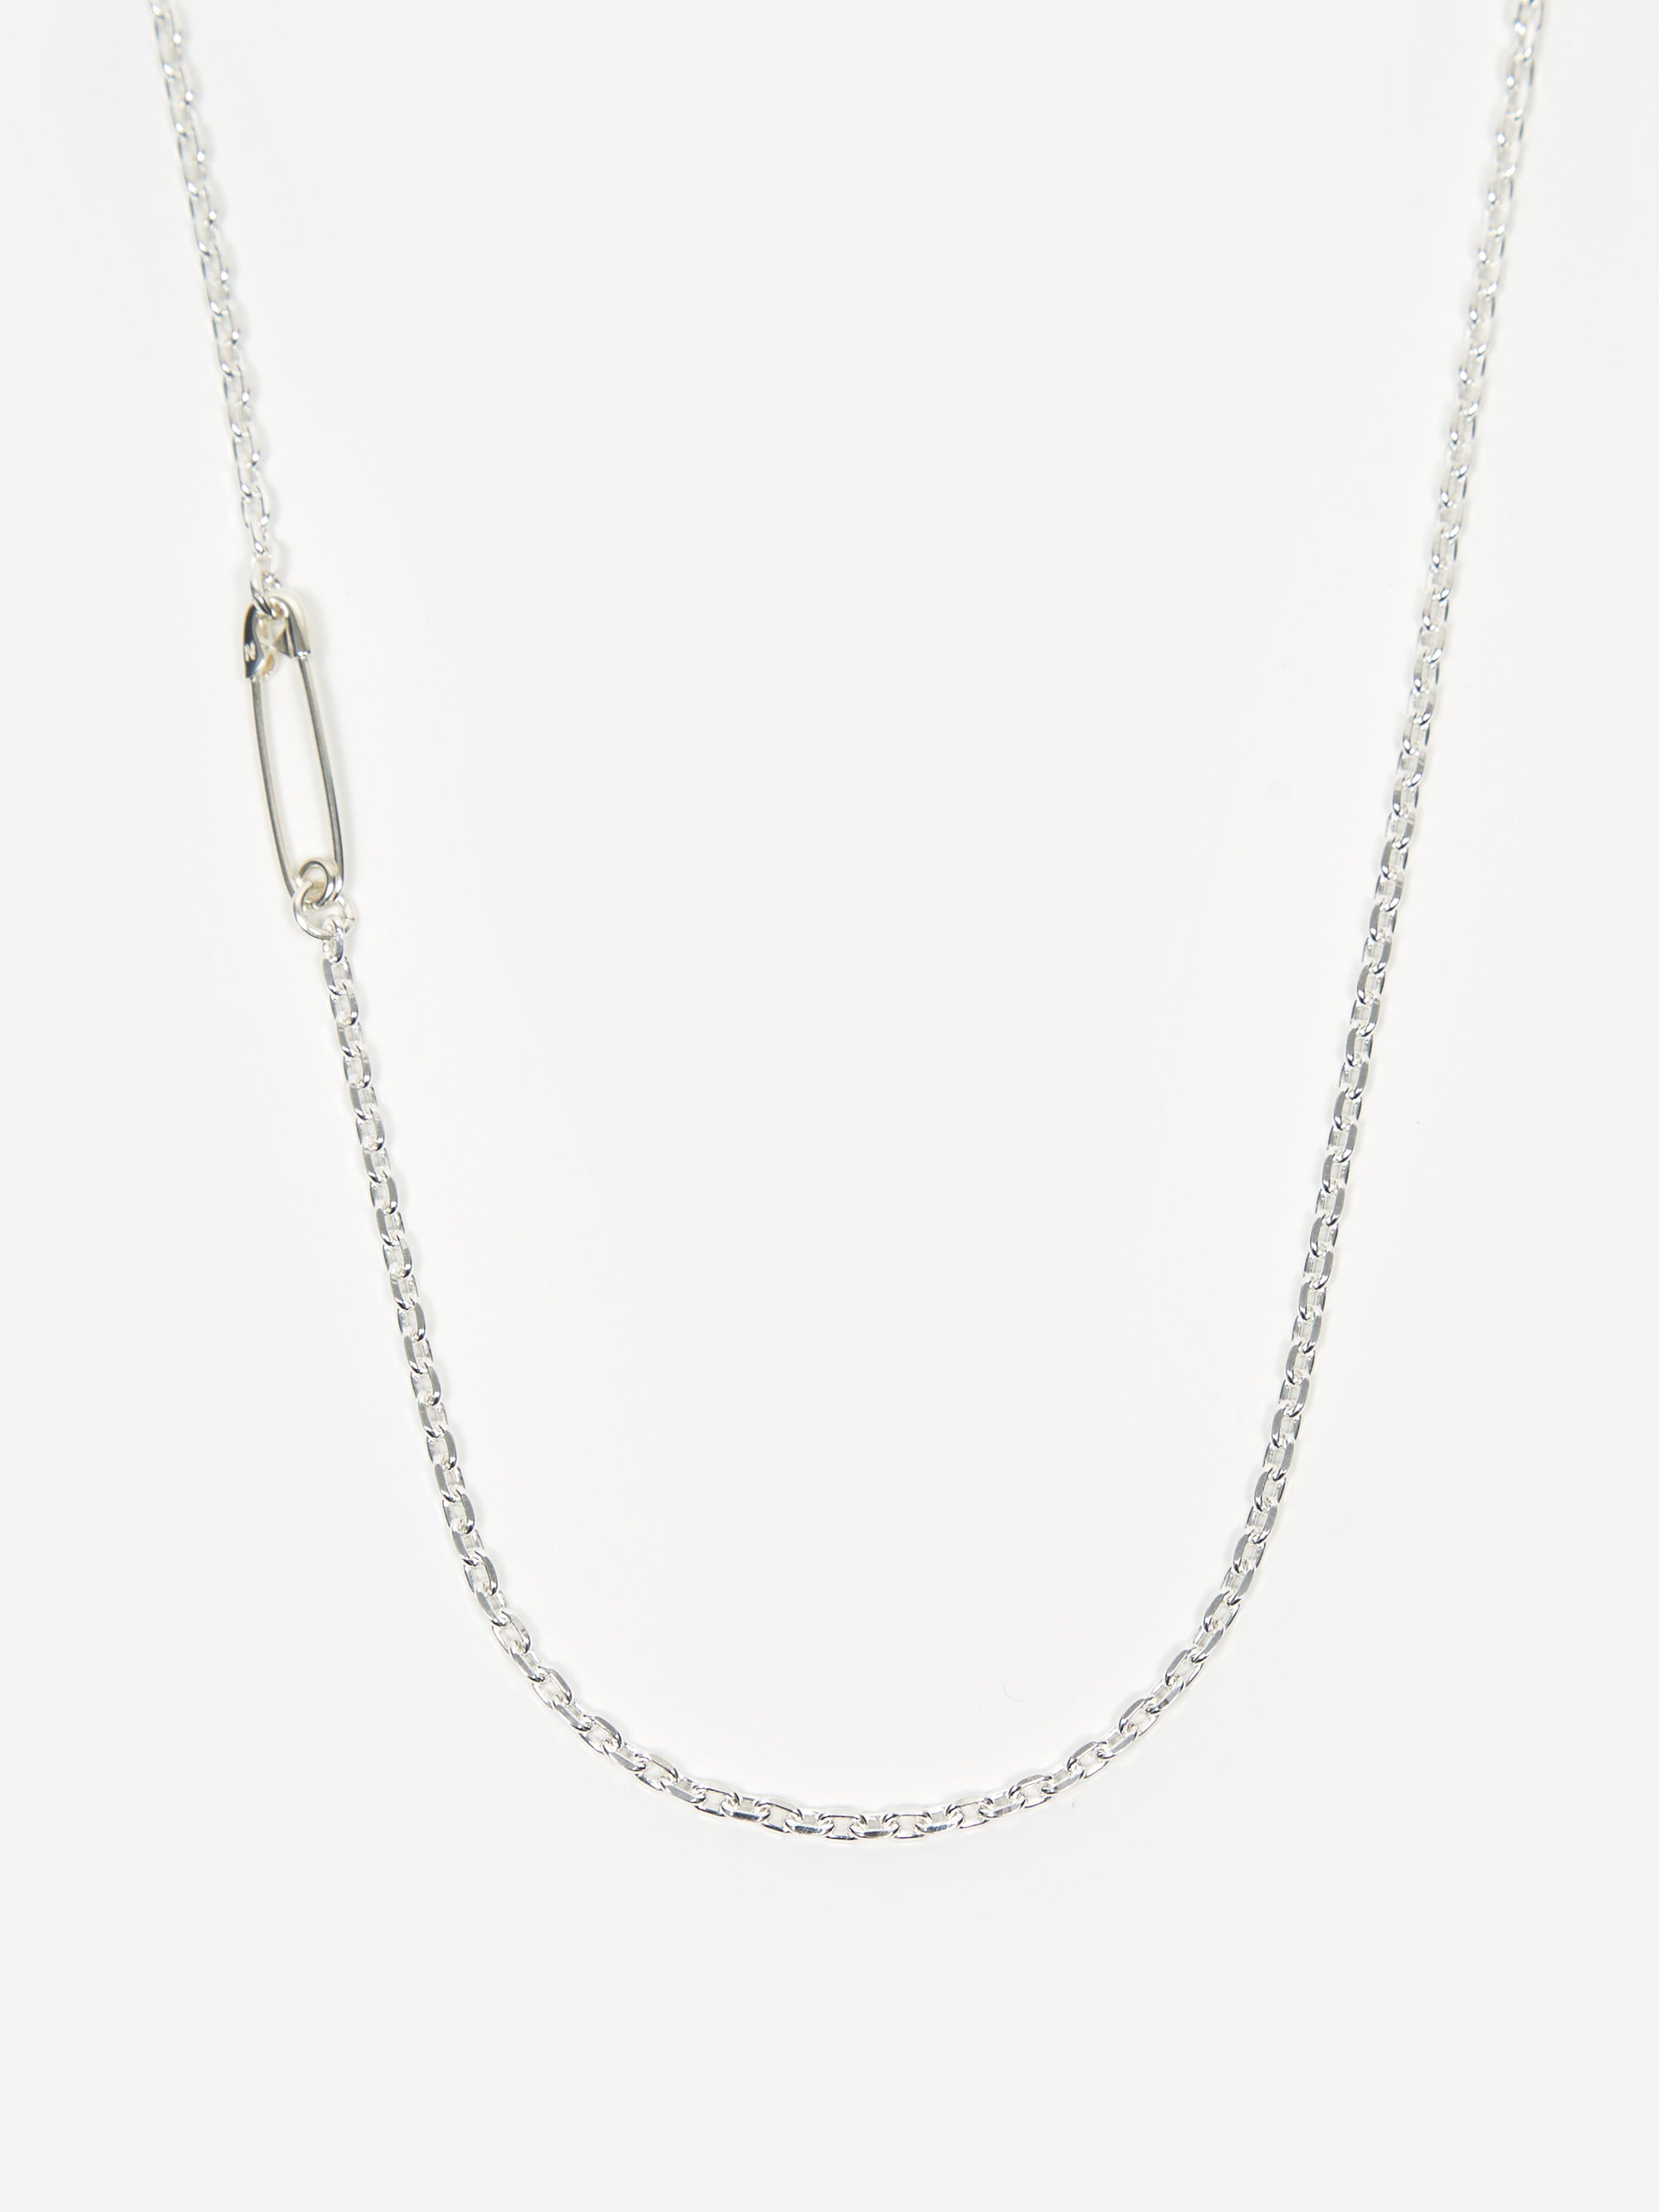 NEIGHBORHOOD SILVER SAFETY PIN NECKLACE - ネックレス